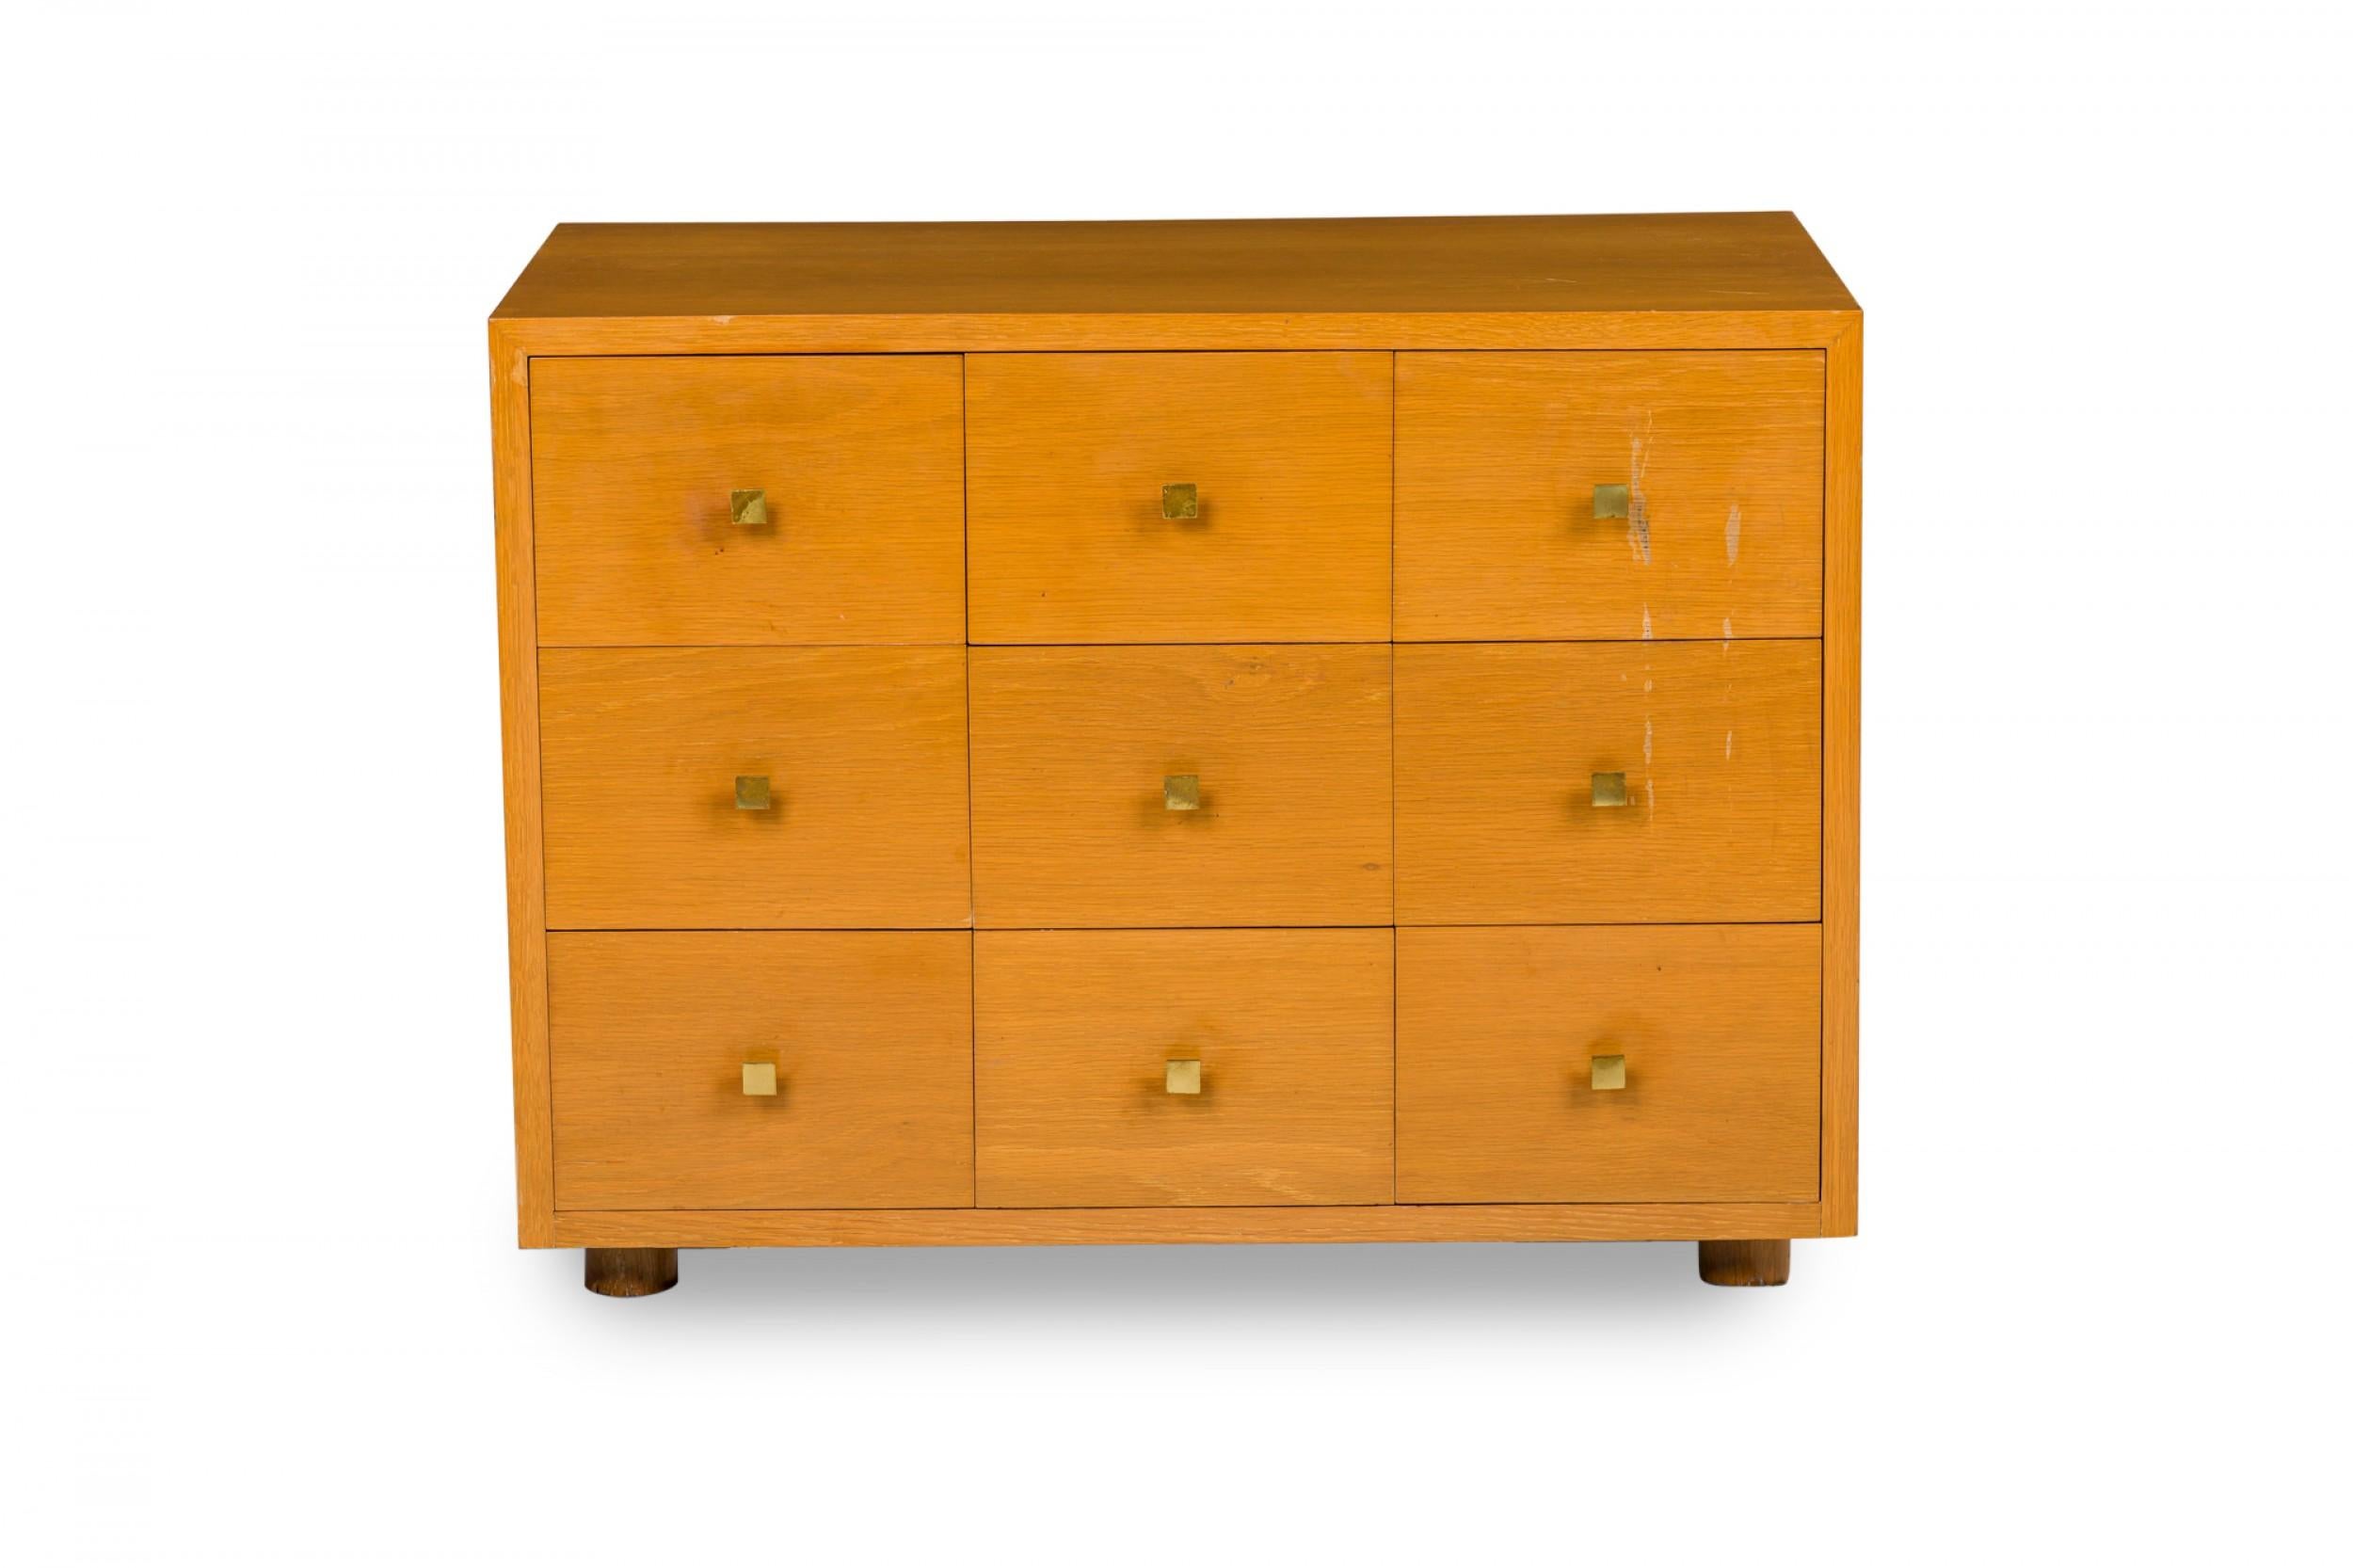 American Mid-Century maple bedside table / commode with nine small drawers with square brass drawer pulls resting on four small square feet.